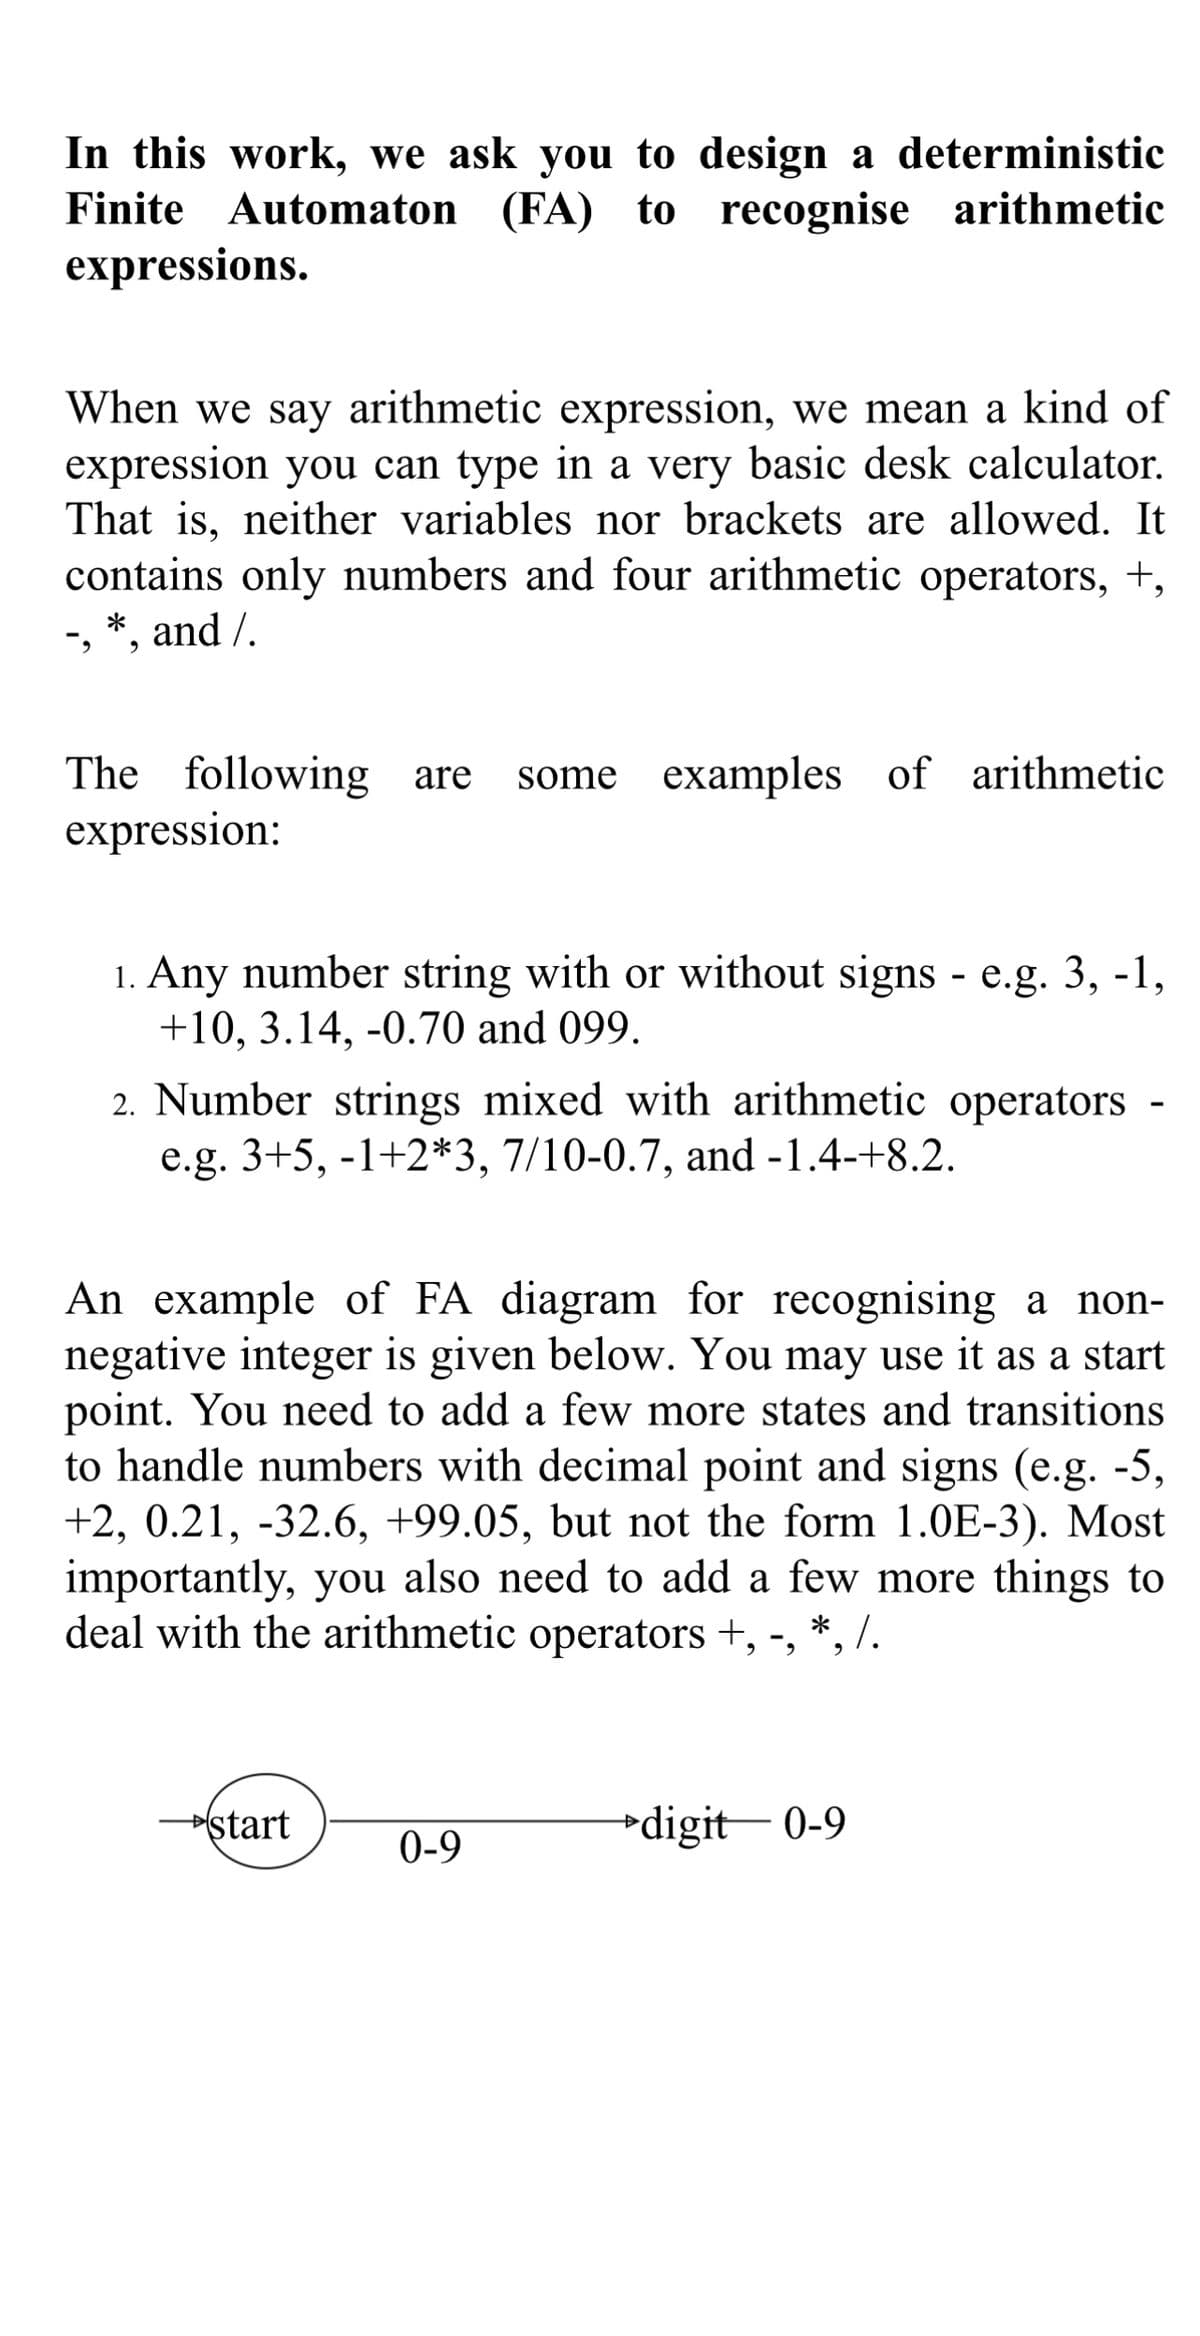 In this work, we ask you to design a deterministic
Finite Automaton (FA) to recognise arithmetic
expressions.
When we say arithmetic expression, we mean a kind of
expression you can type in a very basic desk calculator.
That is, neither variables nor brackets are allowed. It
contains only numbers and four arithmetic operators, +,
-, *, and /.
The following are some examples of arithmetic
expression:
1. Any number string with or without signs - e.g. 3, -1,
+10, 3.14, -0.70 and 099.
2. Number strings mixed with arithmetic operators
e.g. 3+5, -1+2*3, 7/10-0.7, and -1.4-+8.2.
An example of FA diagram for recognising a non-
negative integer is given below. You may use it as a start
point. You need to add a few more states and transitions
to handle numbers with decimal point and signs (e.g. -5,
+2, 0.21, -32.6, +99.05, but not the form 1.0E-3). Most
importantly, you also need to add a few more things to
deal with the arithmetic operators +, -, *, /.
→start
0-9
digit 0-9